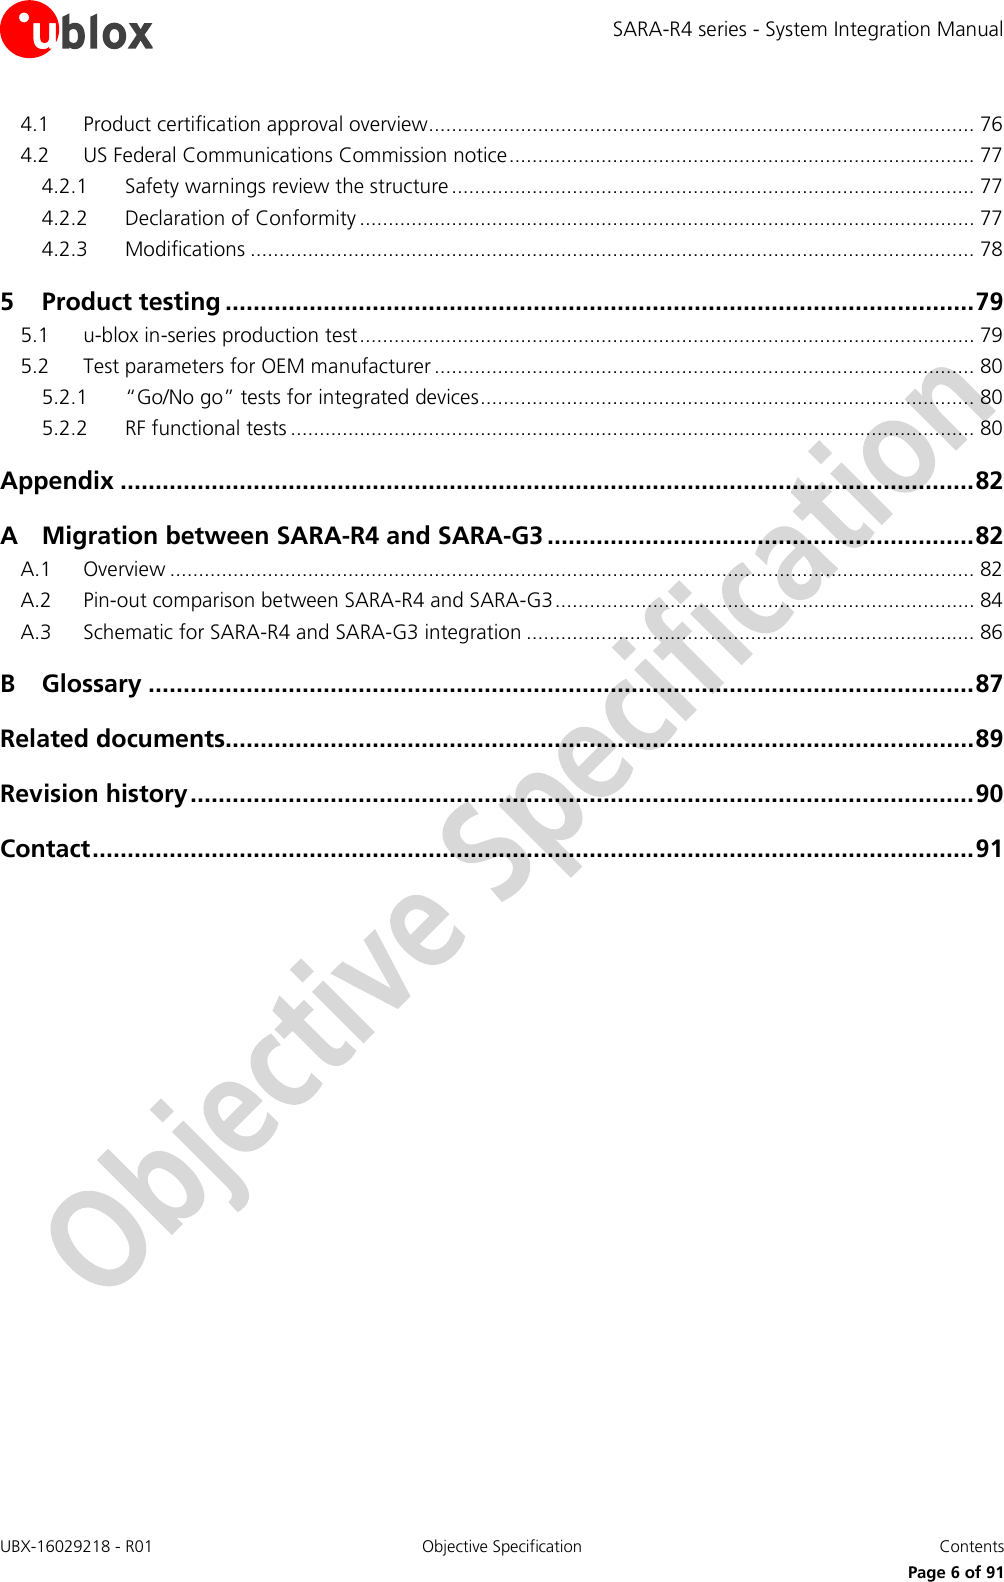 SARA-R4 series - System Integration Manual UBX-16029218 - R01  Objective Specification  Contents     Page 6 of 91 4.1 Product certification approval overview ............................................................................................... 76 4.2 US Federal Communications Commission notice ................................................................................. 77 4.2.1 Safety warnings review the structure ........................................................................................... 77 4.2.2 Declaration of Conformity ........................................................................................................... 77 4.2.3 Modifications .............................................................................................................................. 78 5 Product testing ........................................................................................................... 79 5.1 u-blox in-series production test ........................................................................................................... 79 5.2 Test parameters for OEM manufacturer .............................................................................................. 80 5.2.1 “Go/No go” tests for integrated devices ...................................................................................... 80 5.2.2 RF functional tests ....................................................................................................................... 80 Appendix .......................................................................................................................... 82 A Migration between SARA-R4 and SARA-G3 ............................................................. 82 A.1 Overview ............................................................................................................................................ 82 A.2 Pin-out comparison between SARA-R4 and SARA-G3 ......................................................................... 84 A.3 Schematic for SARA-R4 and SARA-G3 integration .............................................................................. 86 B Glossary ...................................................................................................................... 87 Related documents........................................................................................................... 89 Revision history ................................................................................................................ 90 Contact .............................................................................................................................. 91  